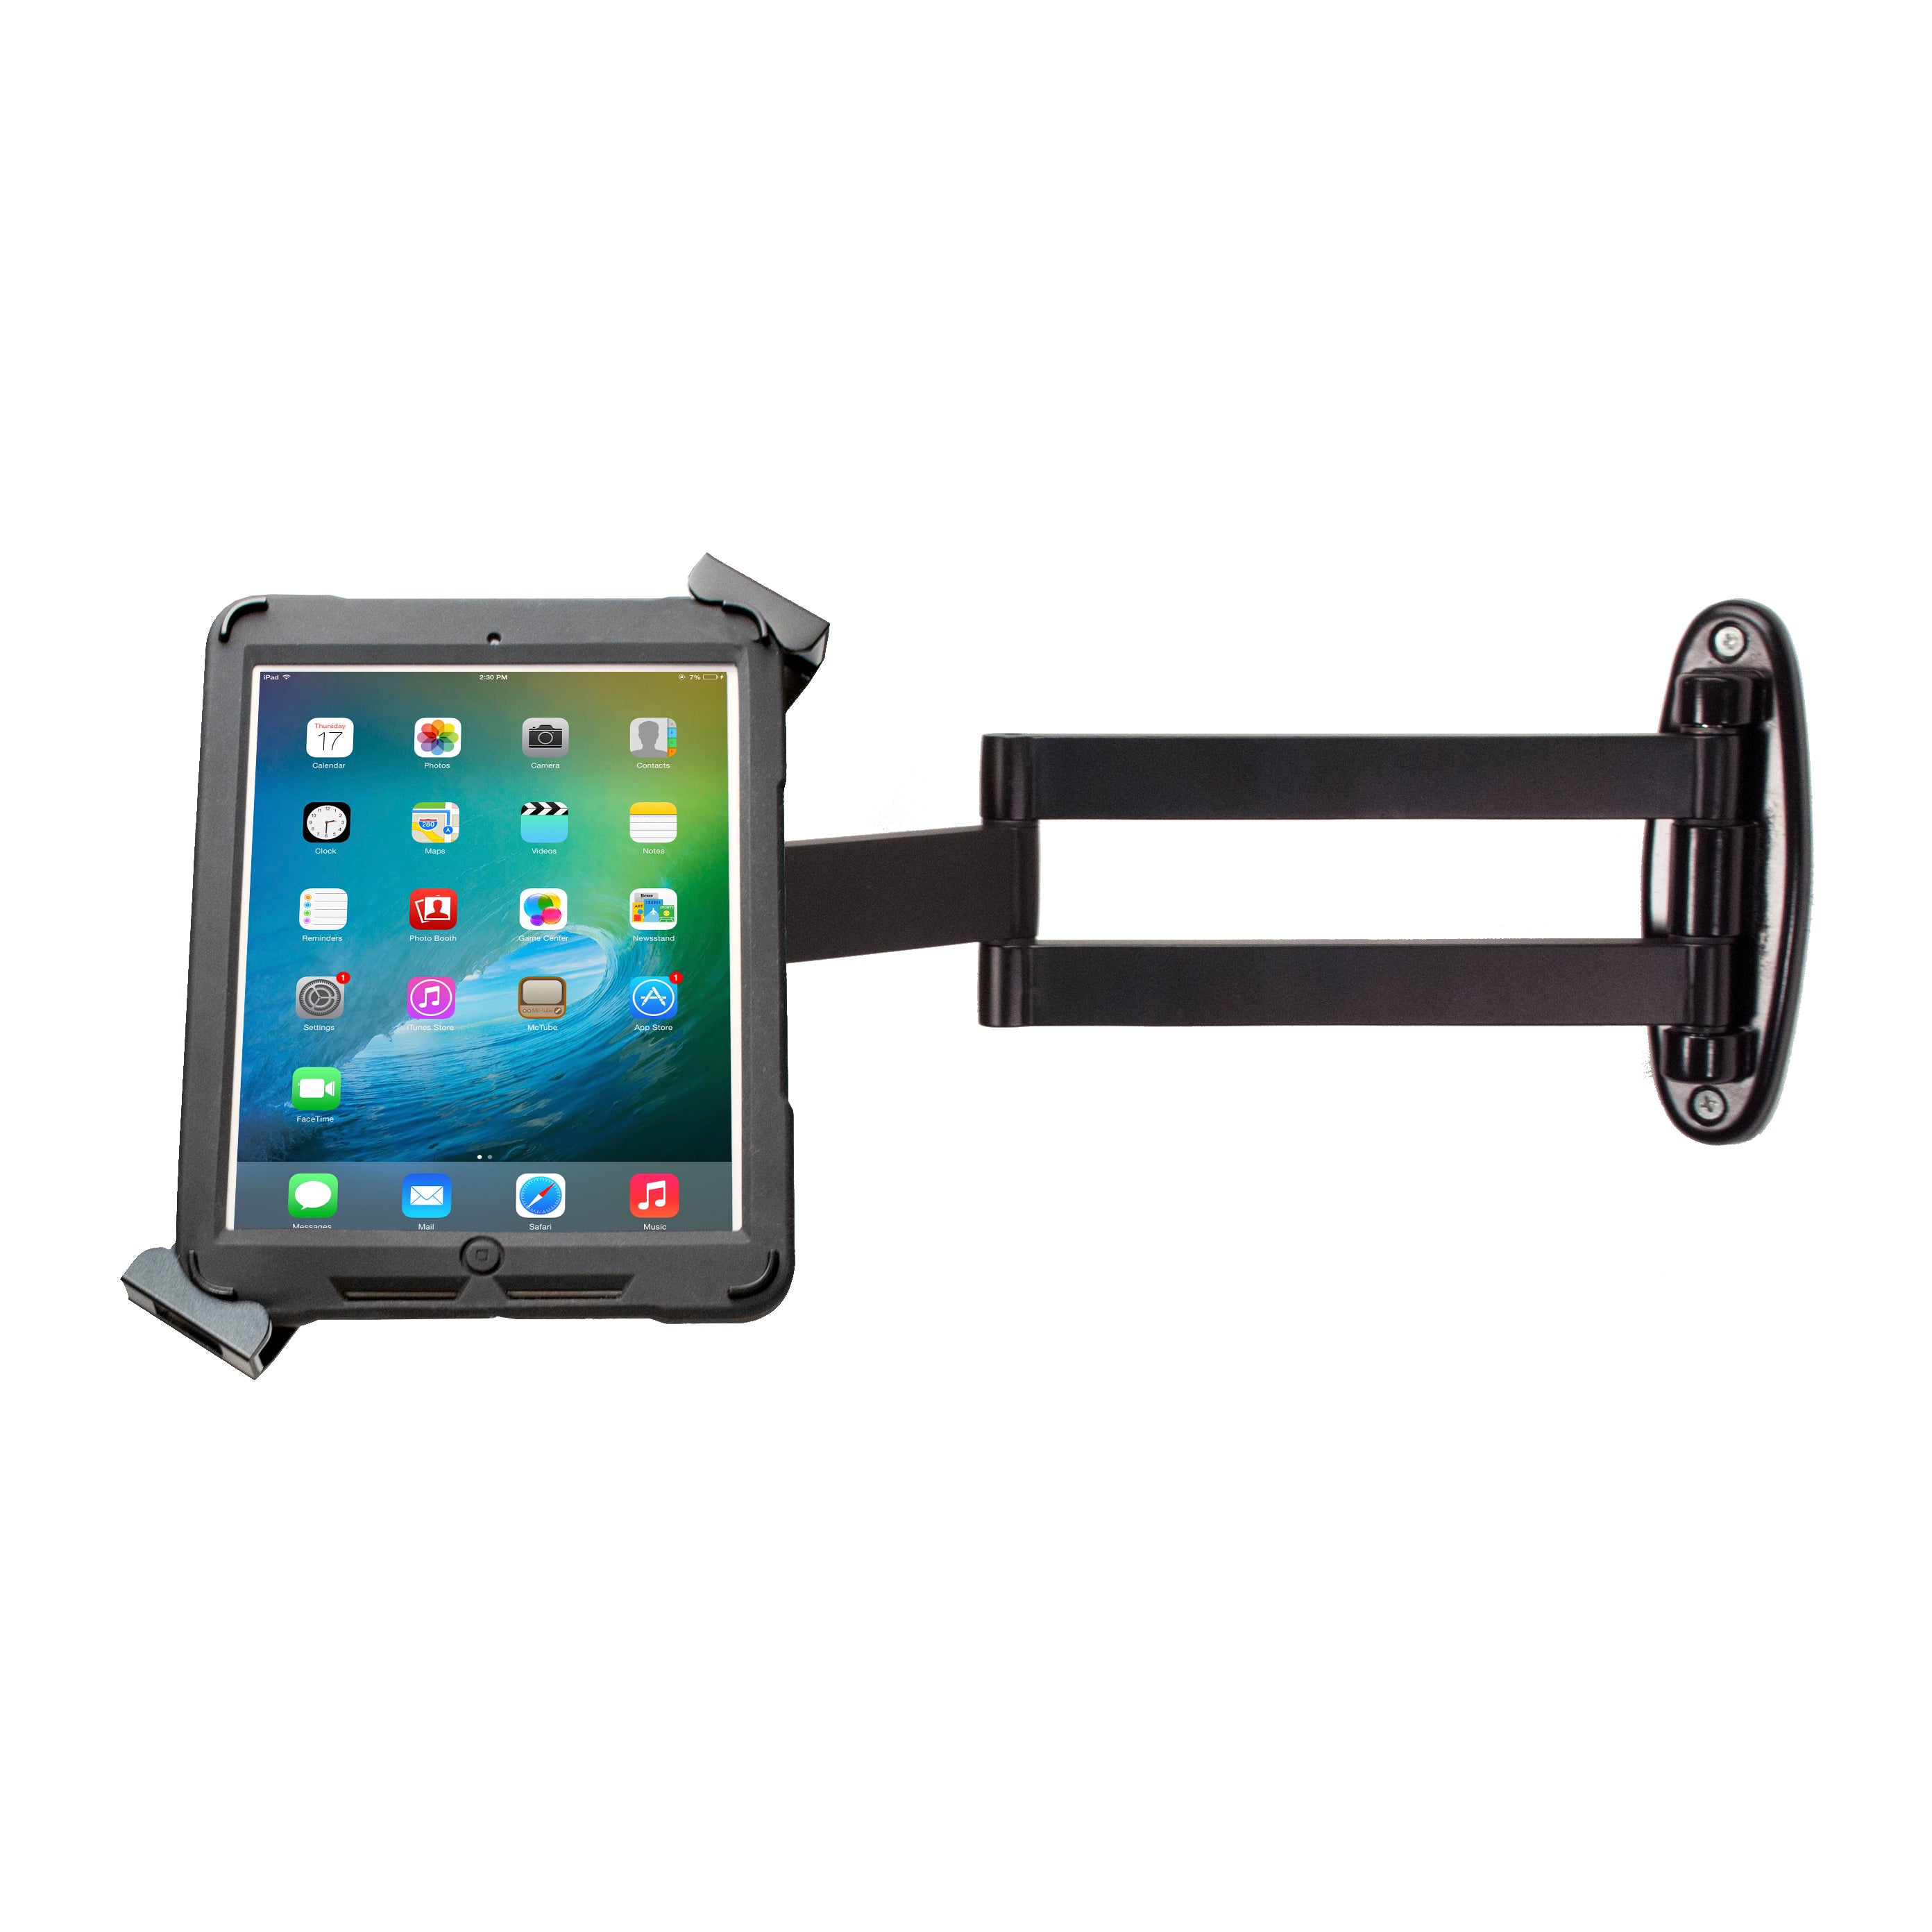 Articulating Security Wall Mount for 7-13 Inch Tablets, including iPad 10.2-inch (7th/ 8th/ 9th Generation)